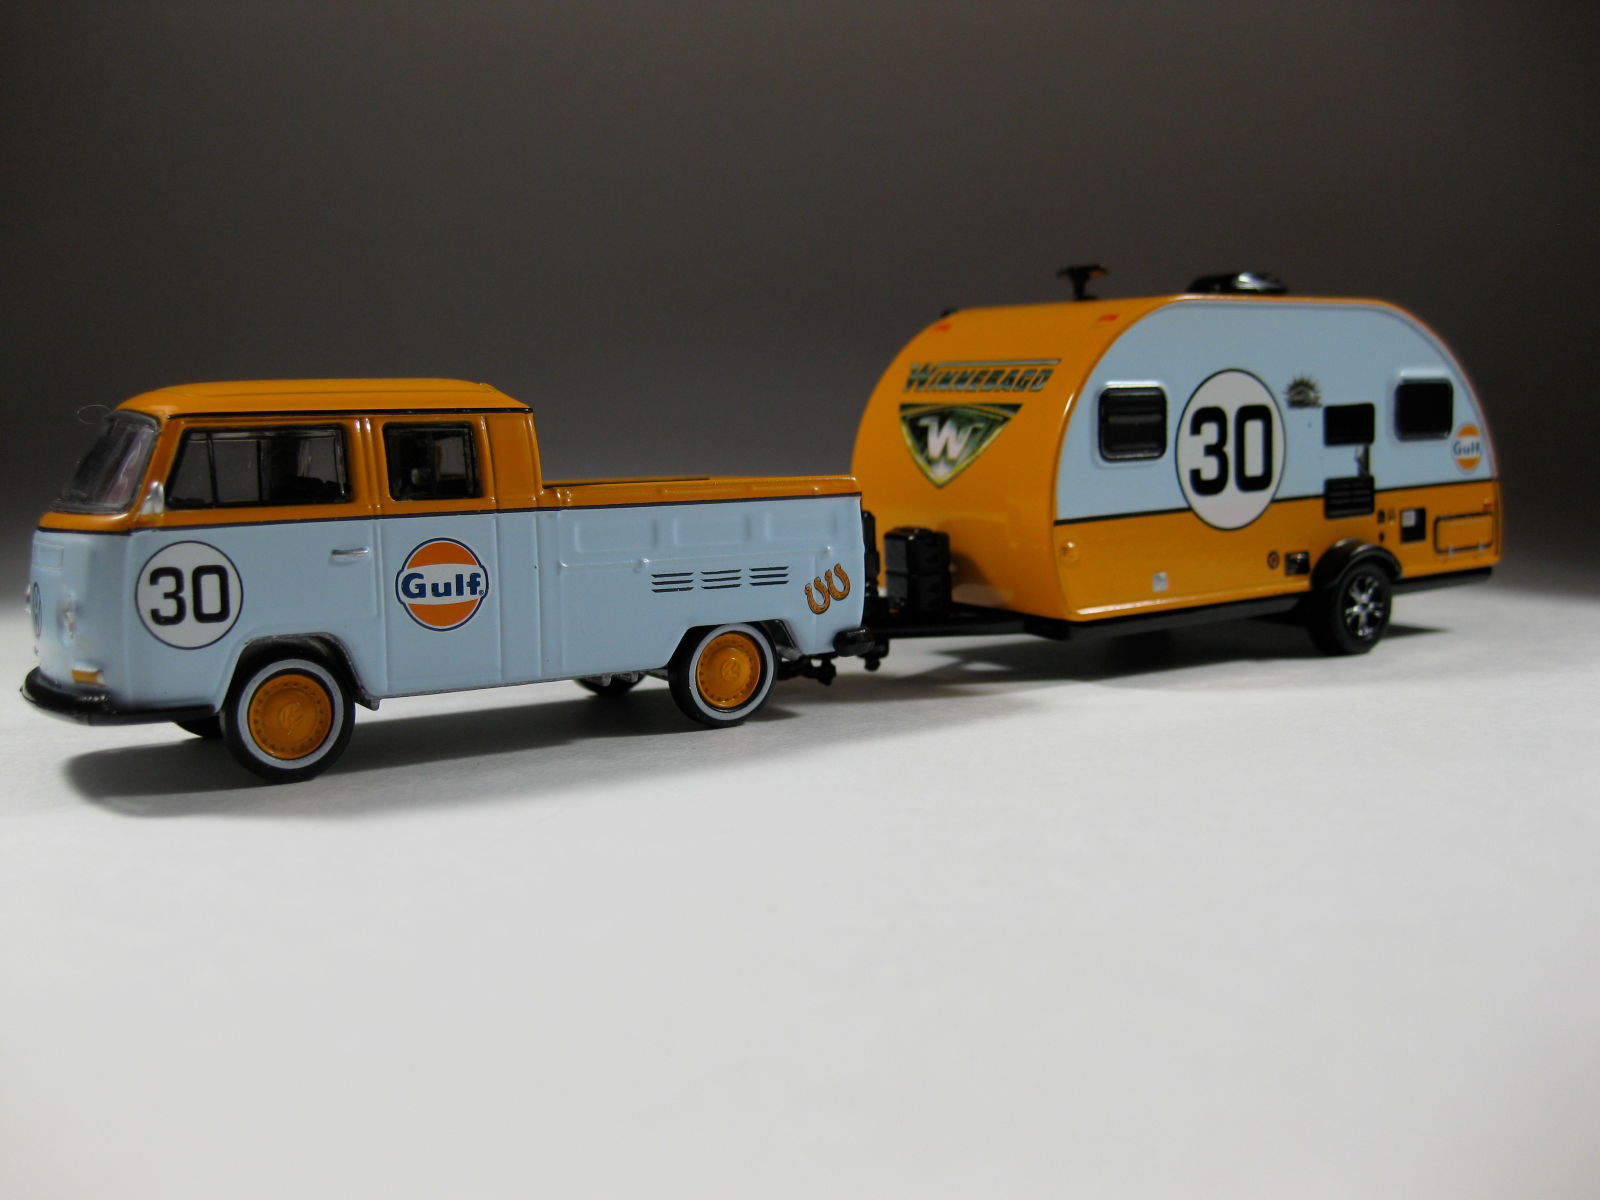 Illustration for article titled VW TYPE 2 CREW CAB + GULF LIVERY = JOY!!